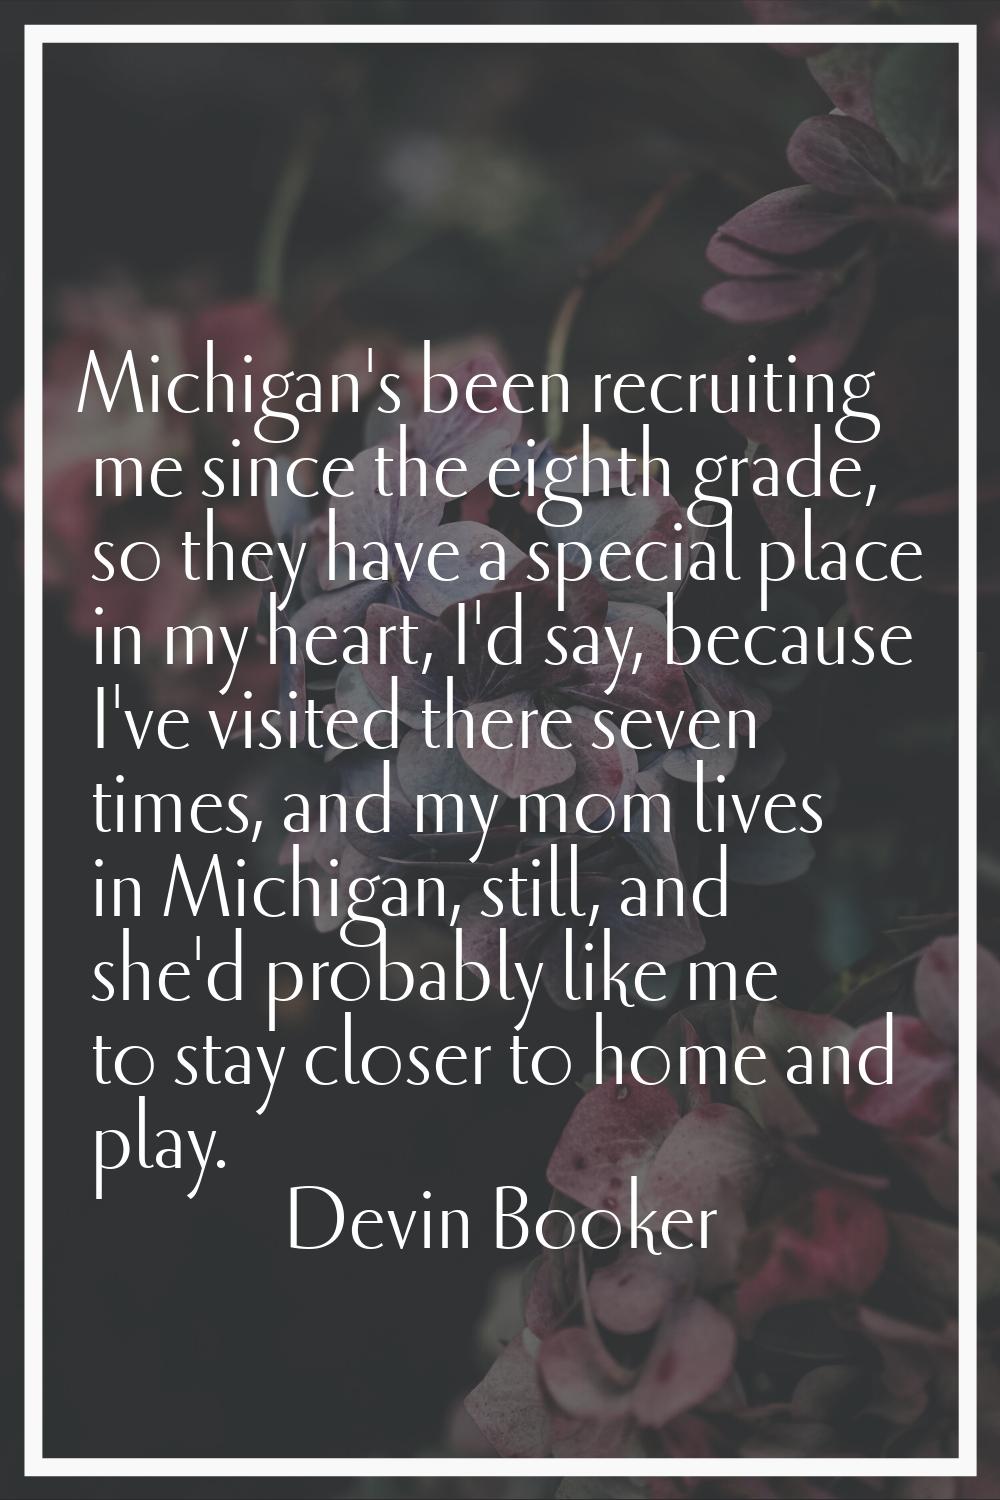 Michigan's been recruiting me since the eighth grade, so they have a special place in my heart, I'd